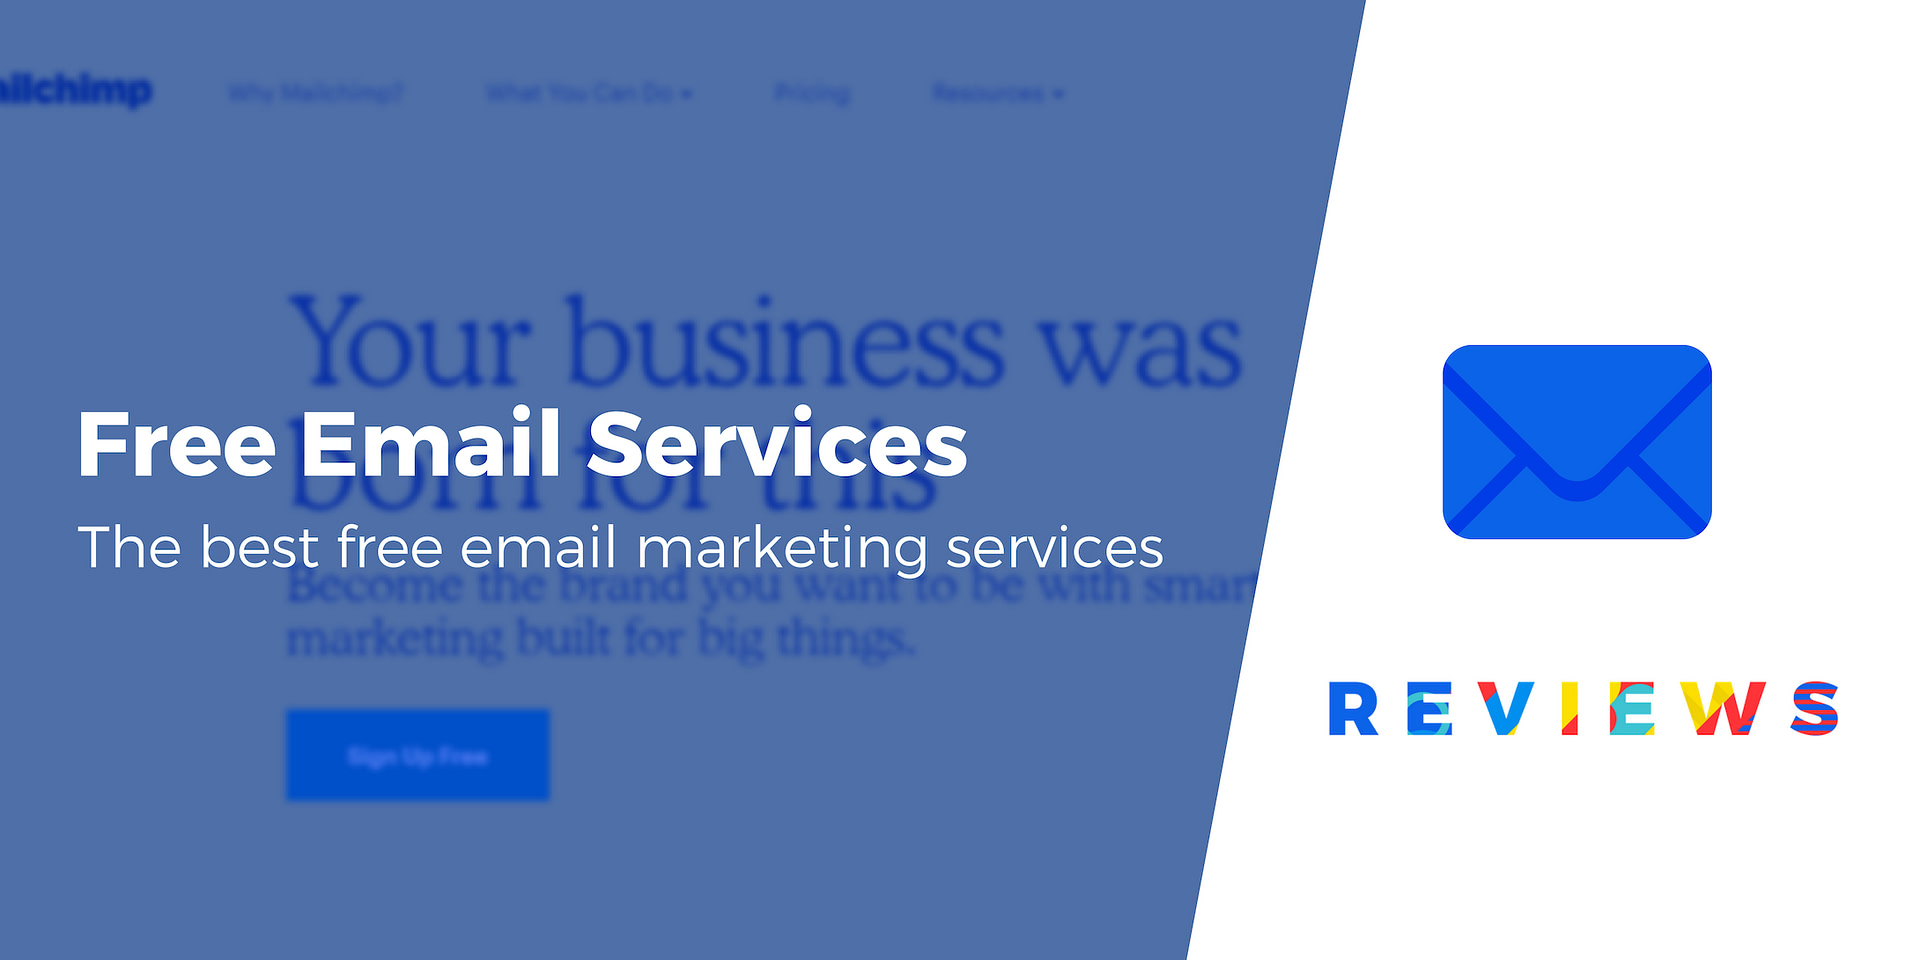 7 Best Free Email Marketing Services Compared for 2022